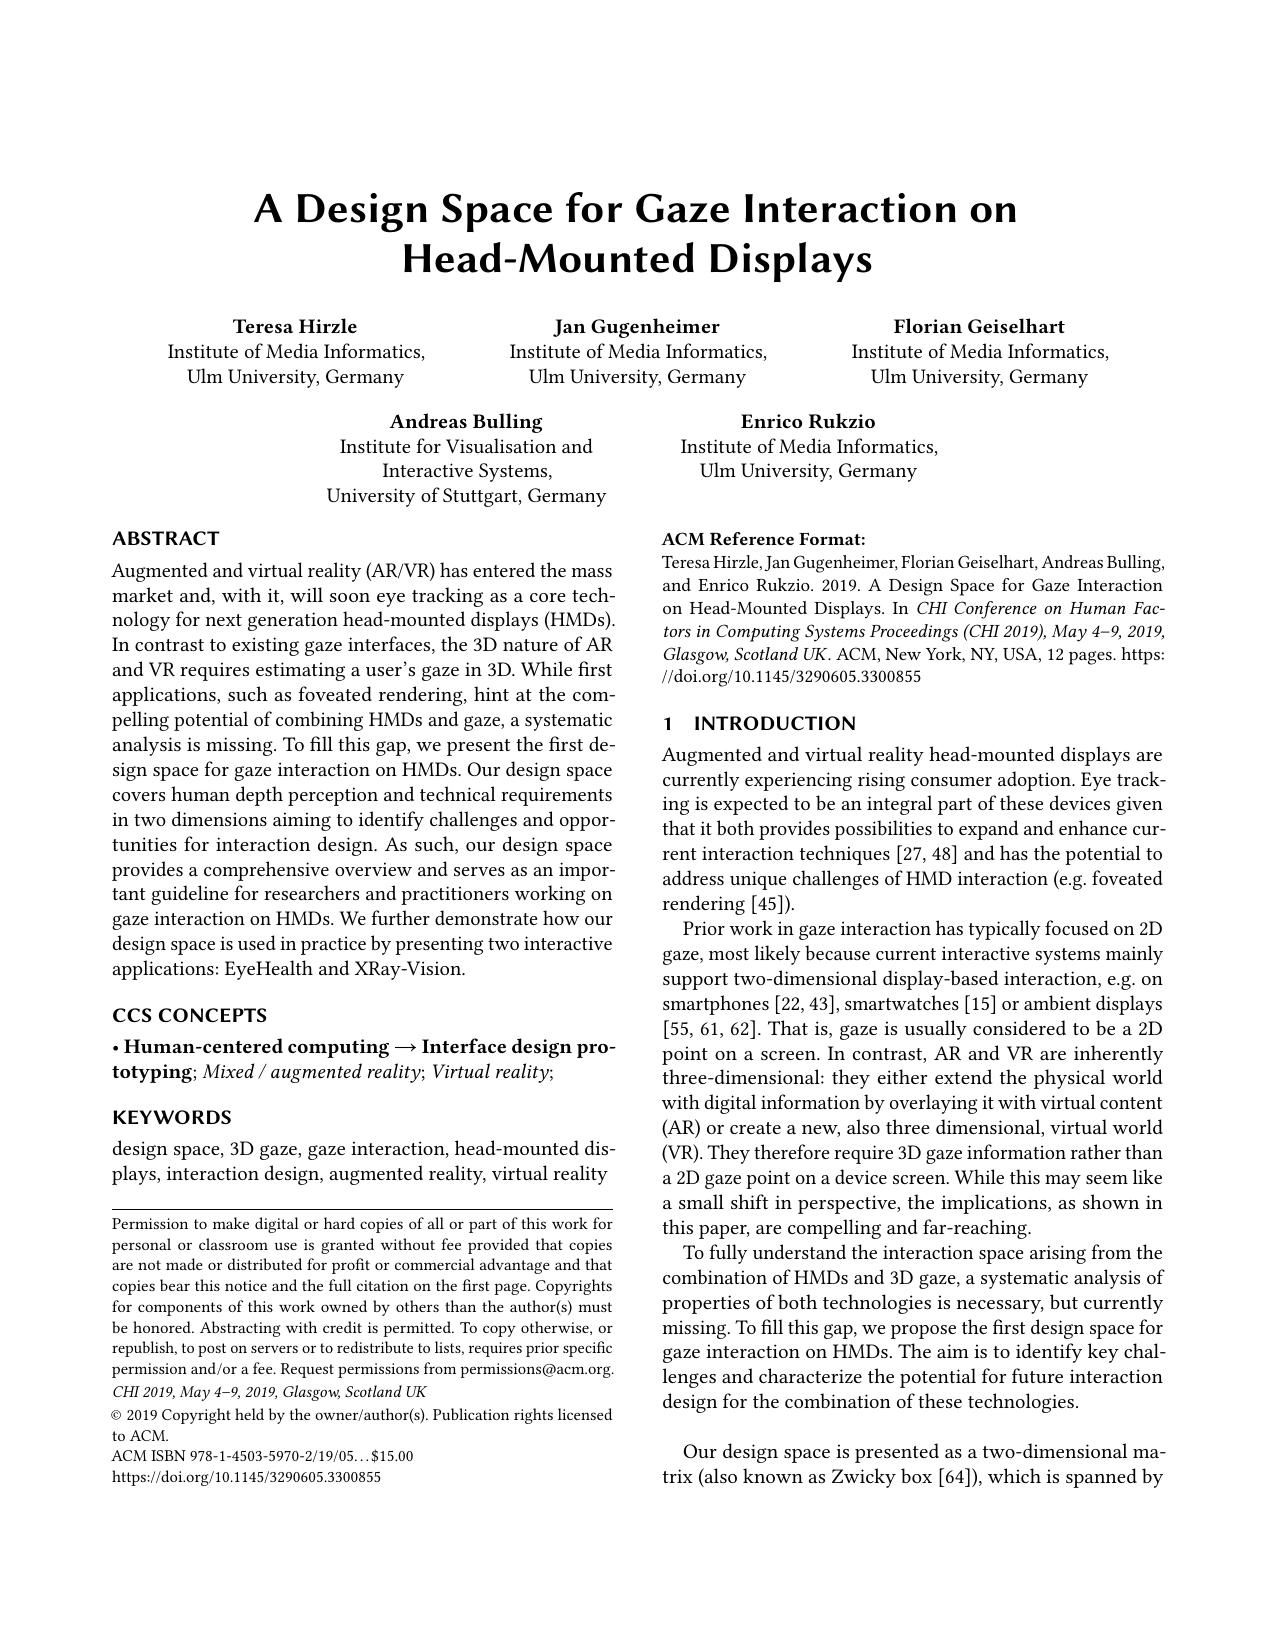 A Design Space for Gaze Interaction on Head-mounted Displays